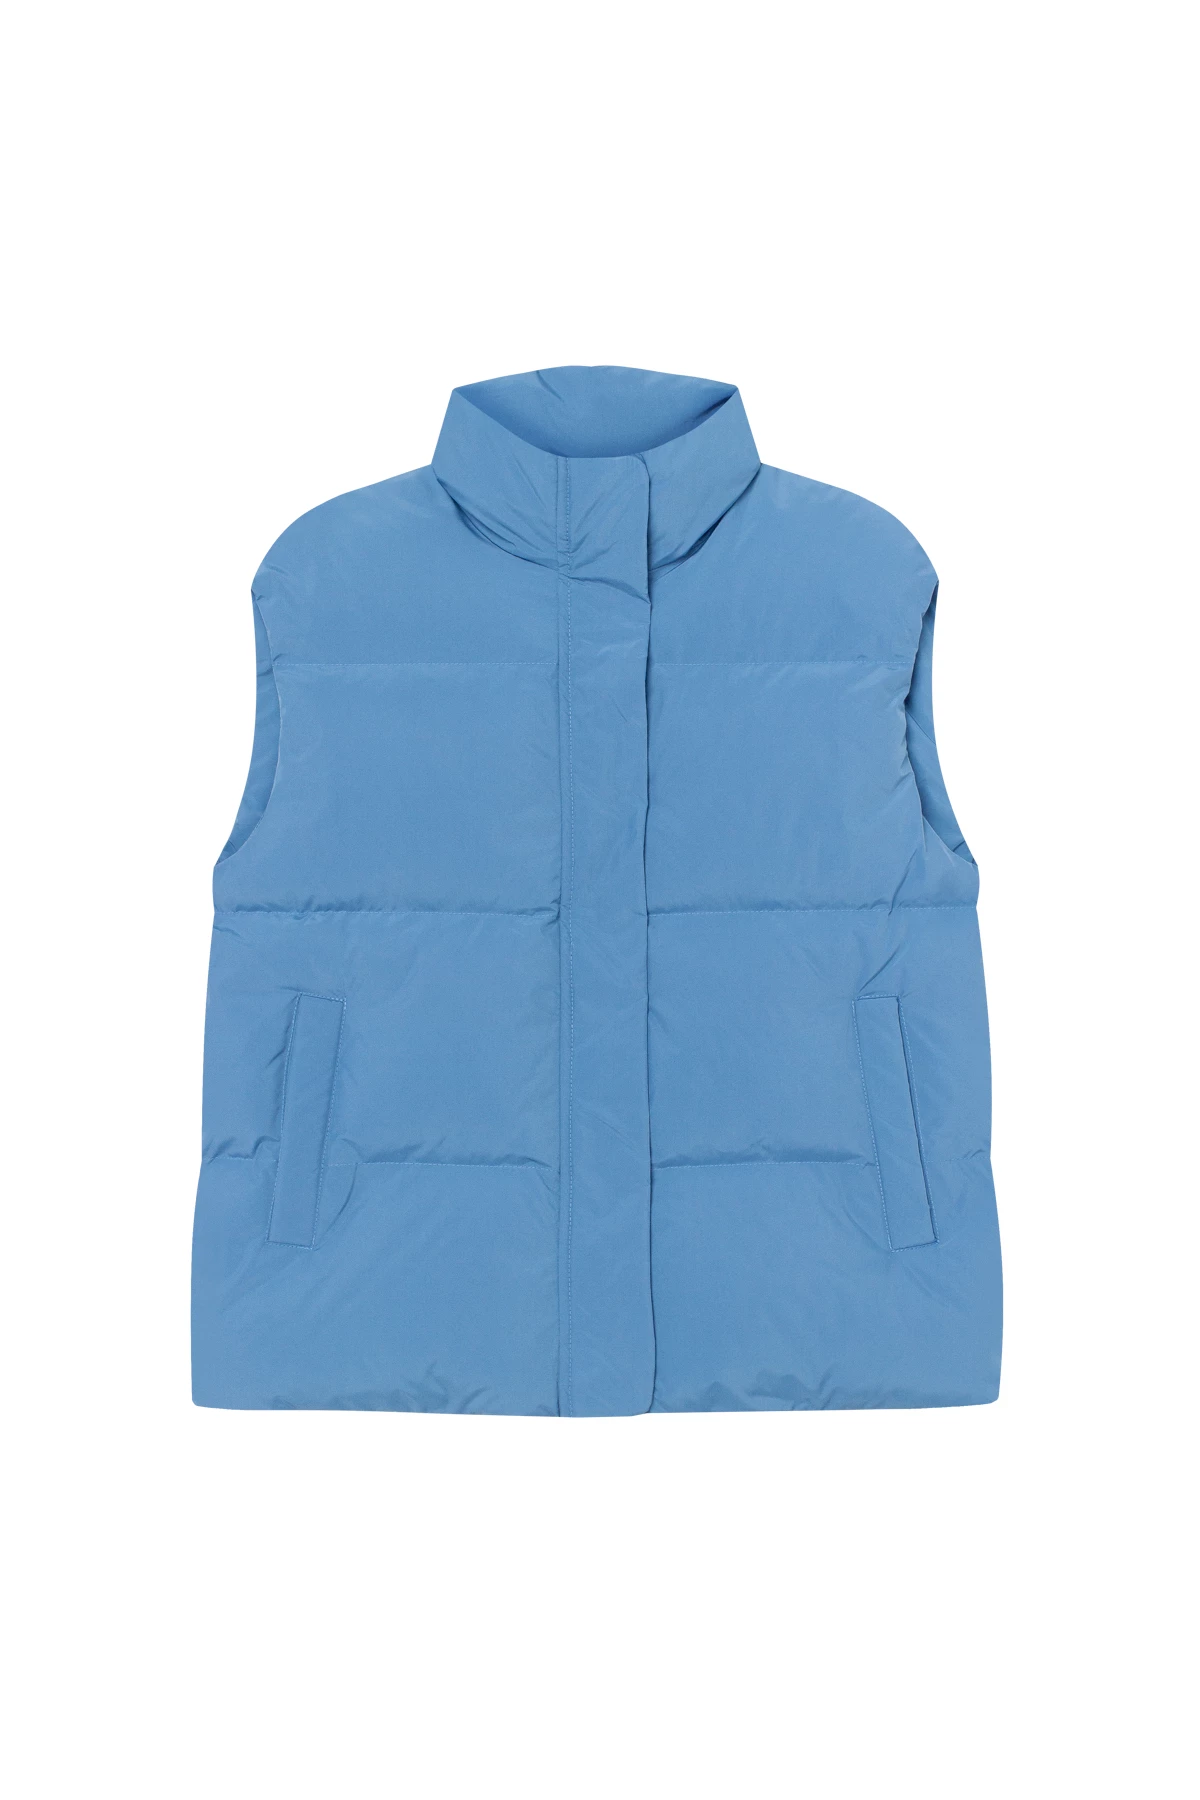 Navy blue quilted padded vest, photo 7